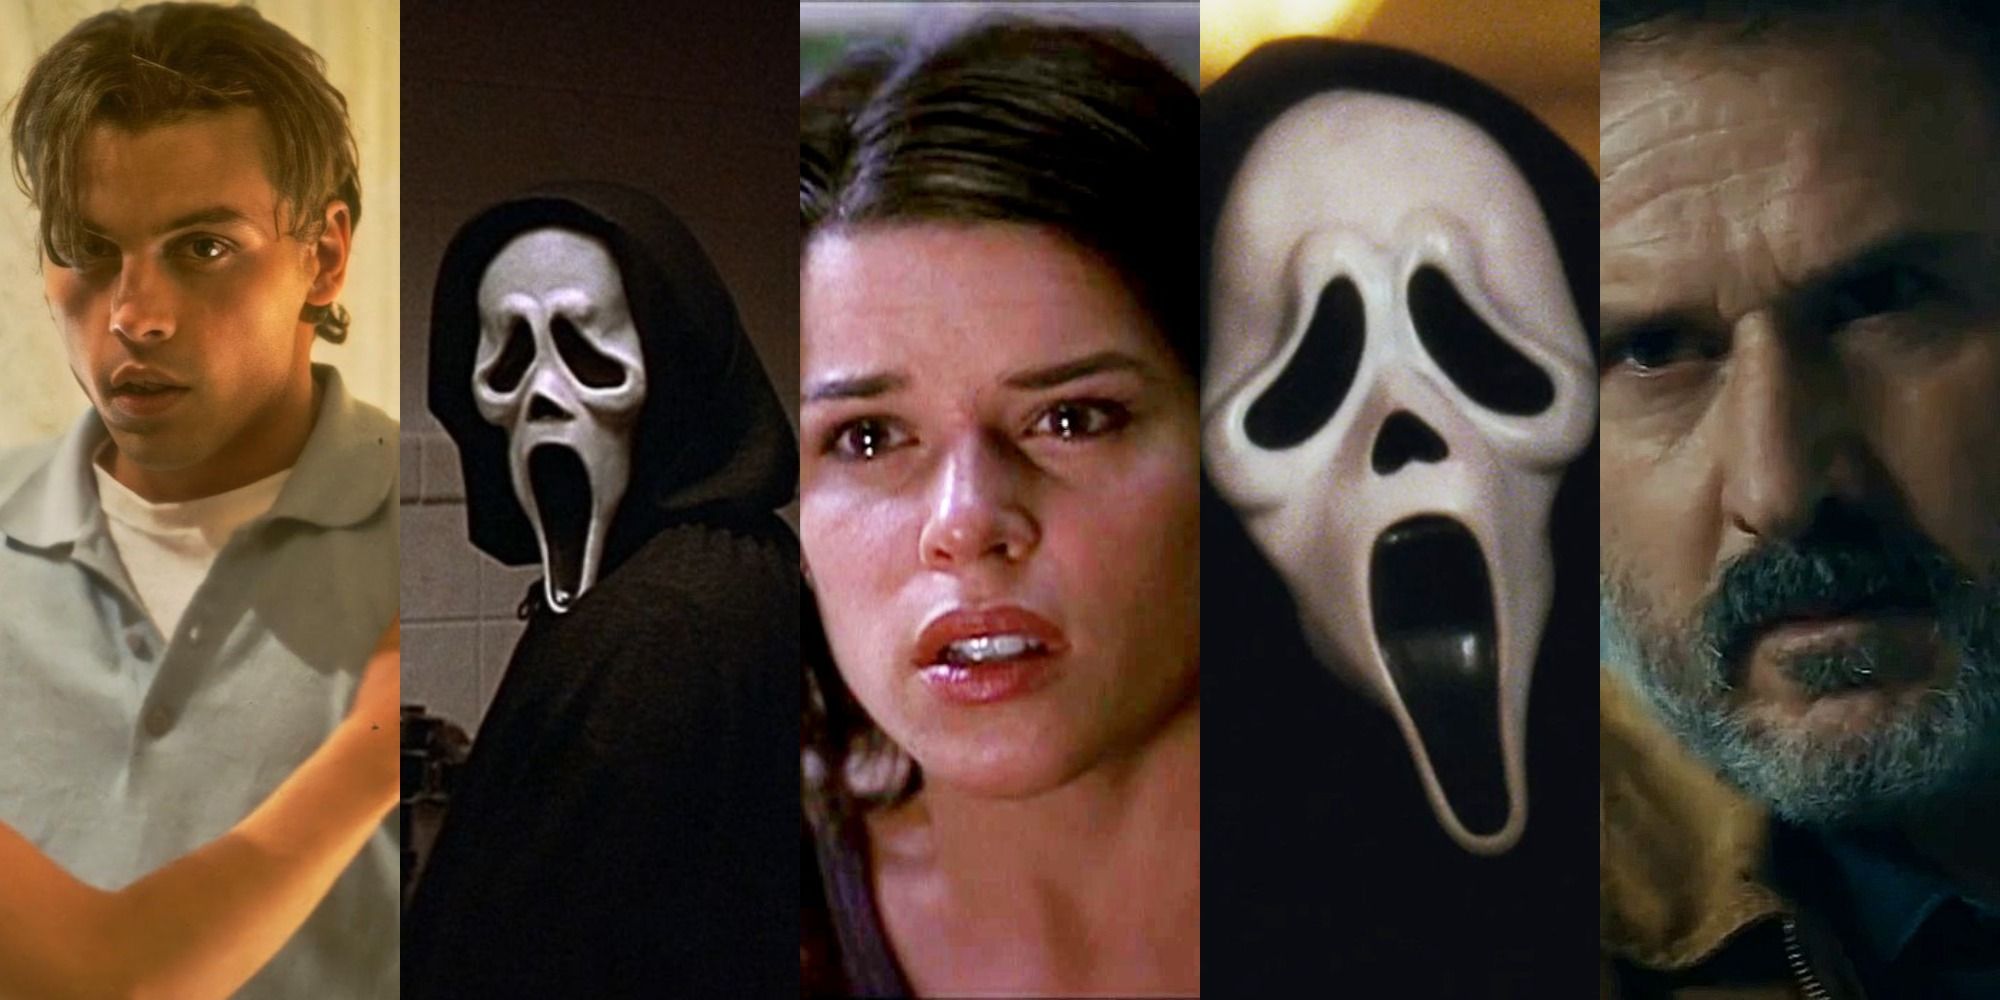 Scream': Every Ghostface Killer from the 'Scream' Movies, Ranked